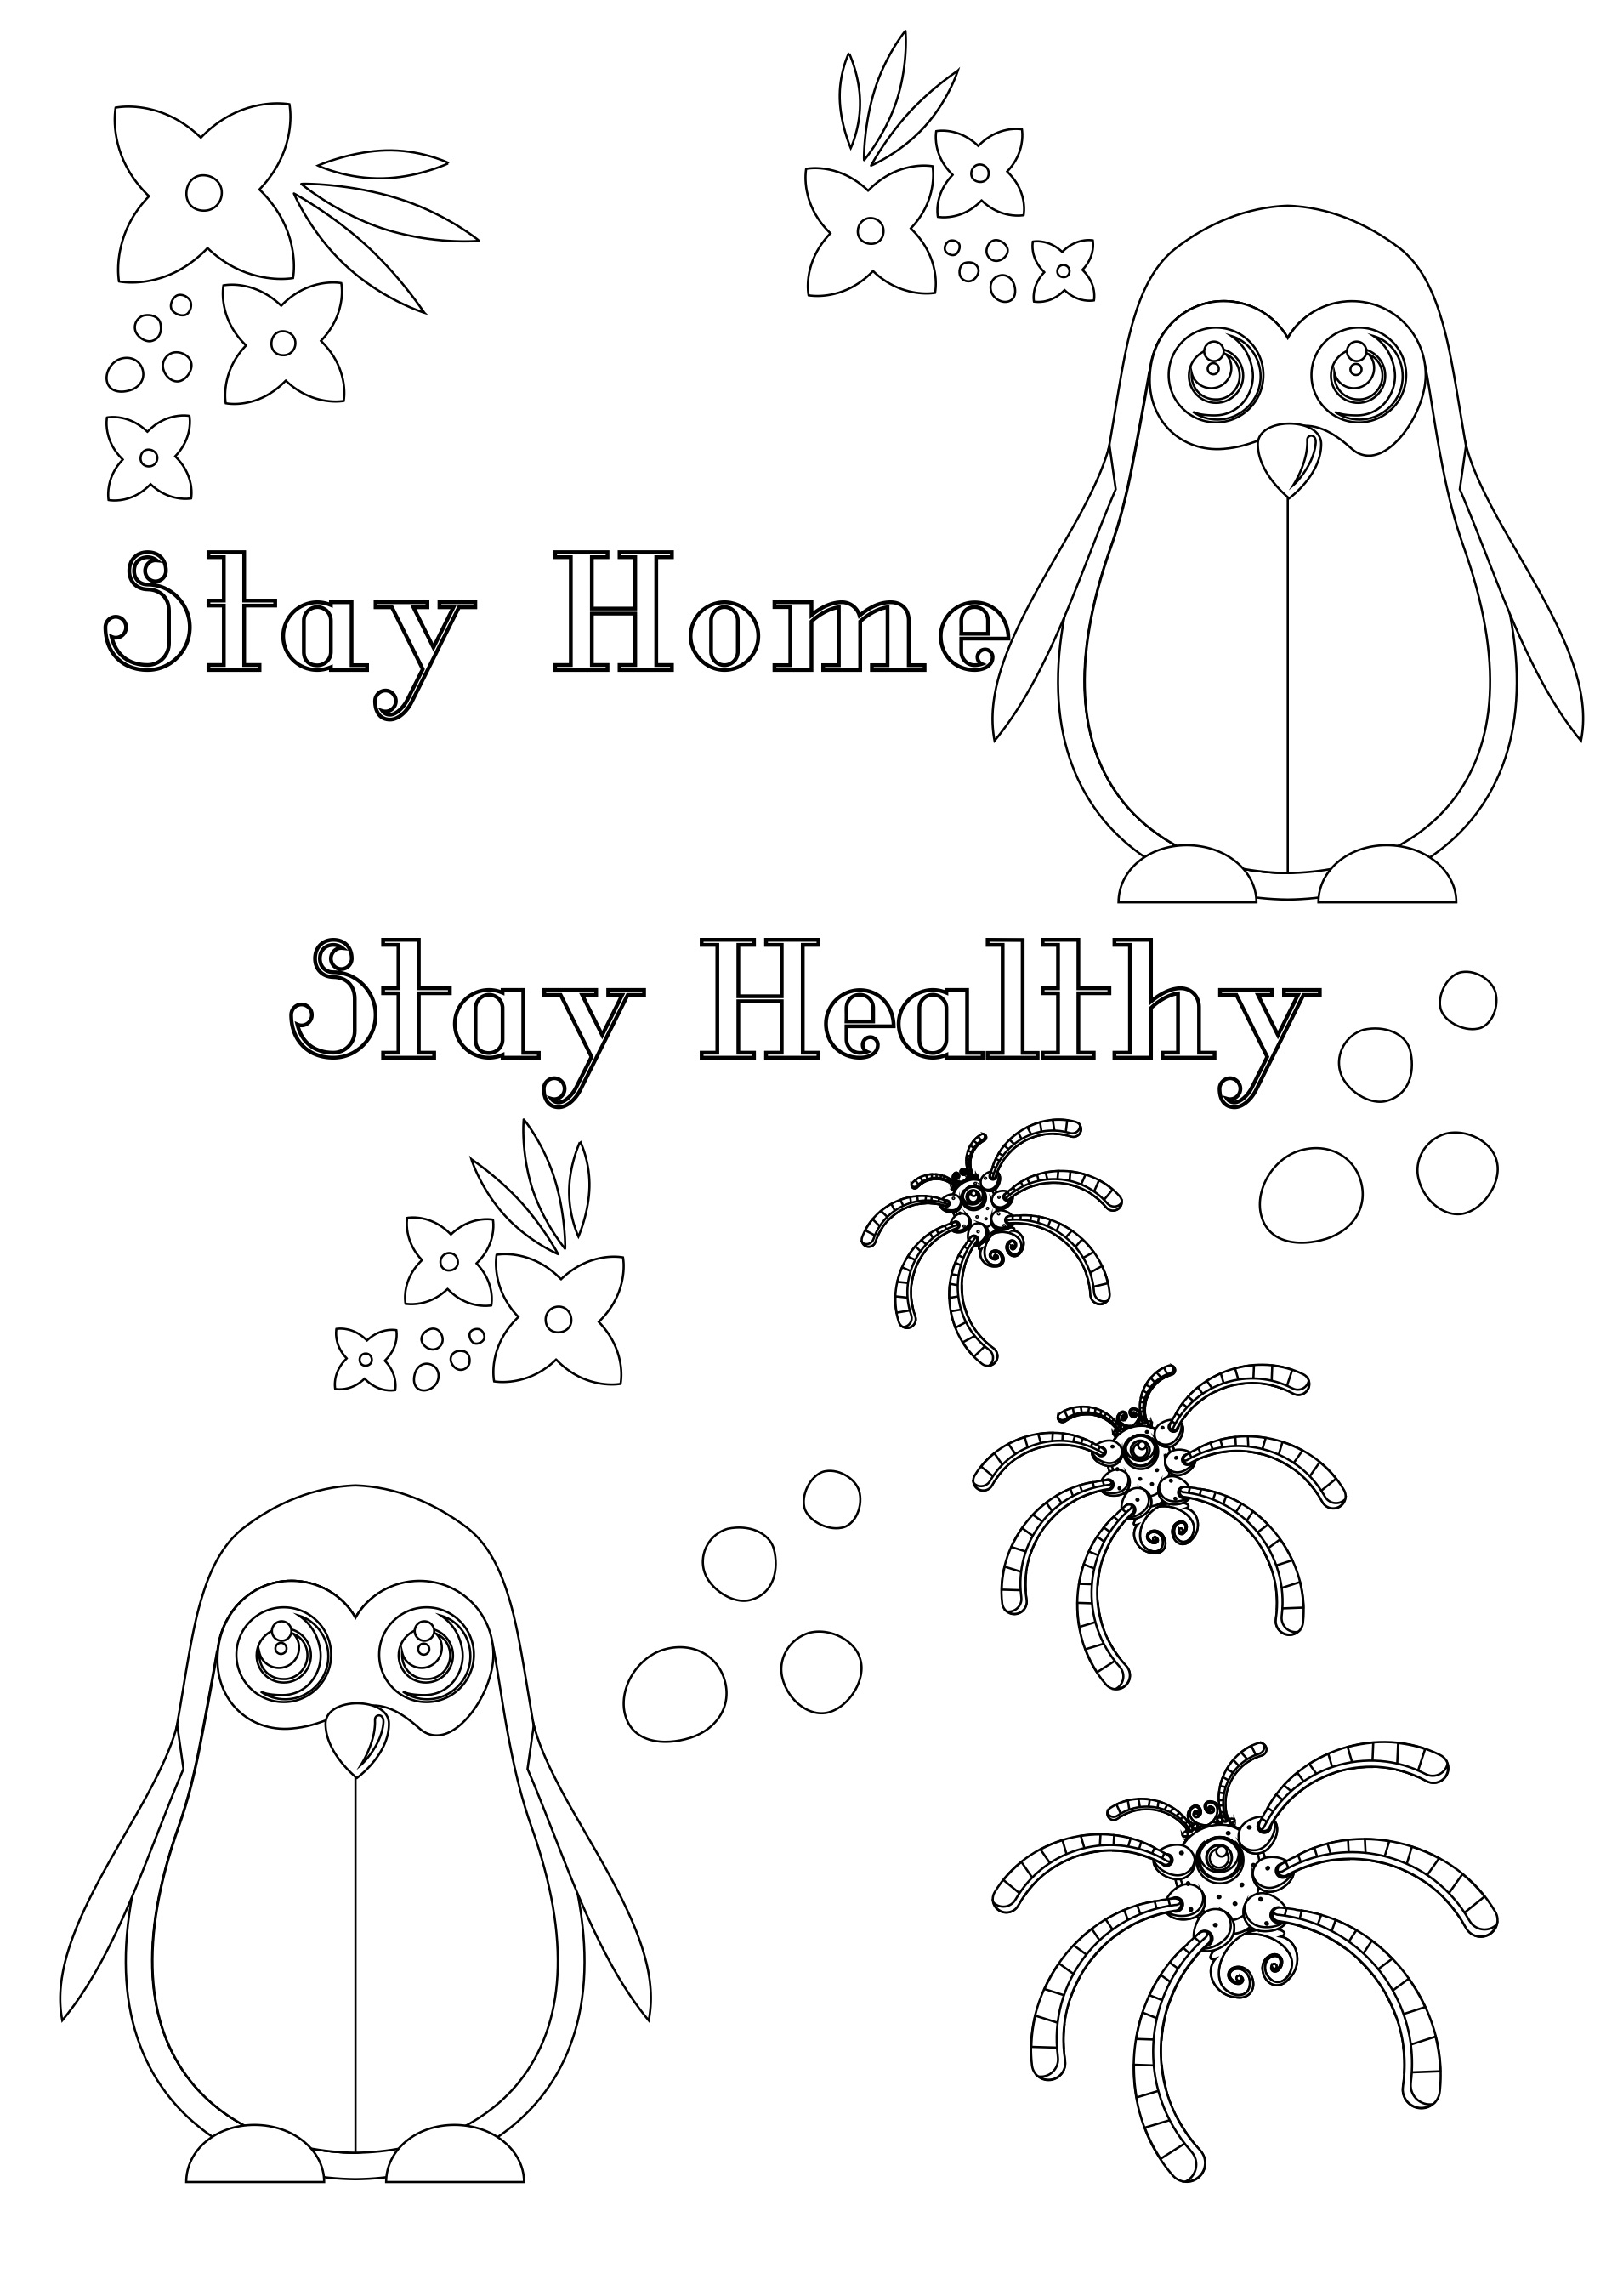 Stay Home Coloring Card for Kids